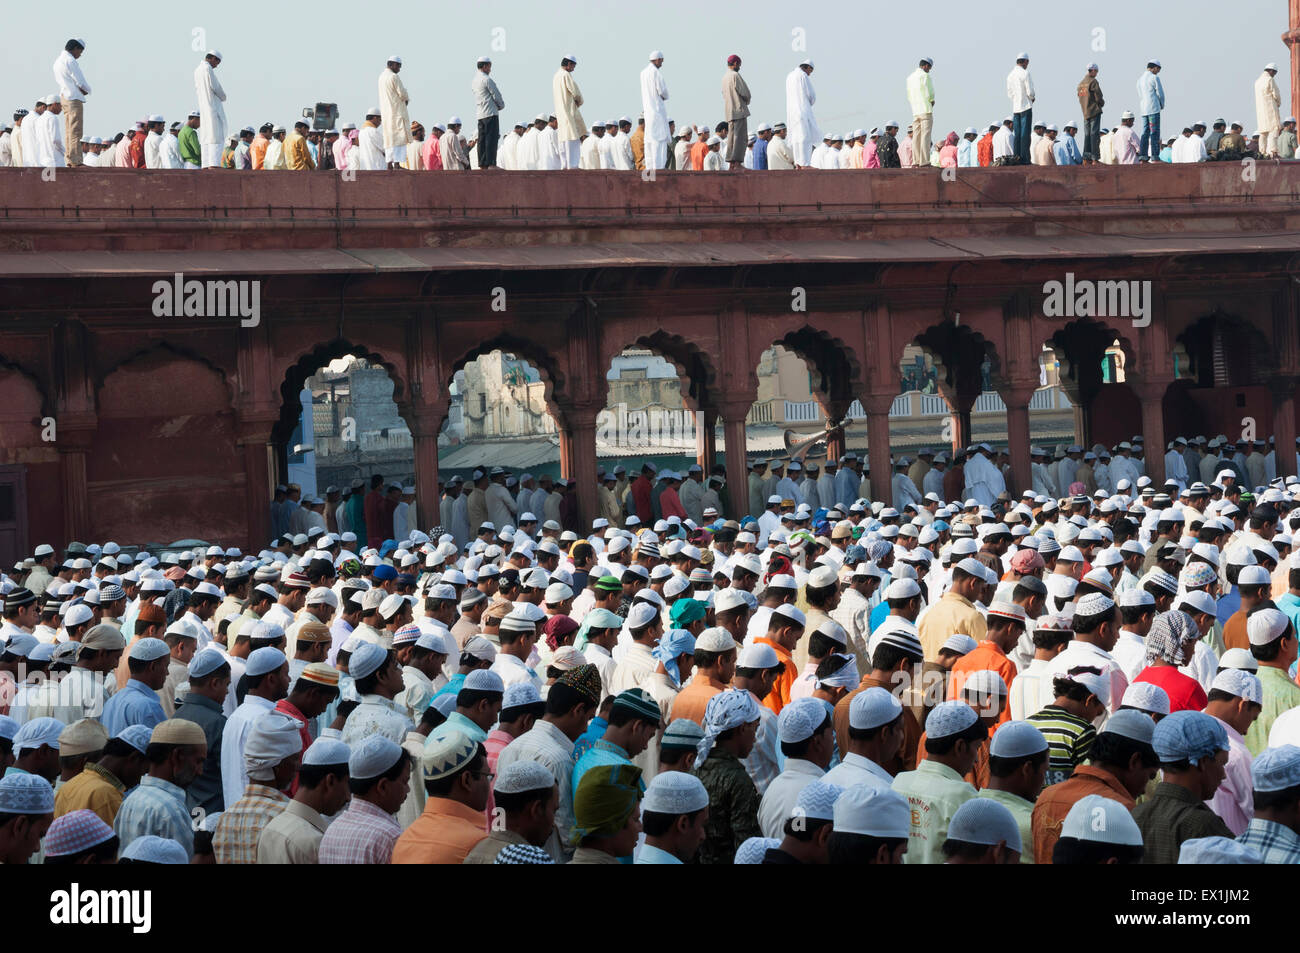 People offering prayers during the festival of Eid-ul-fitr at the Jama Masjid mosque in old Delhi, India. Stock Photo